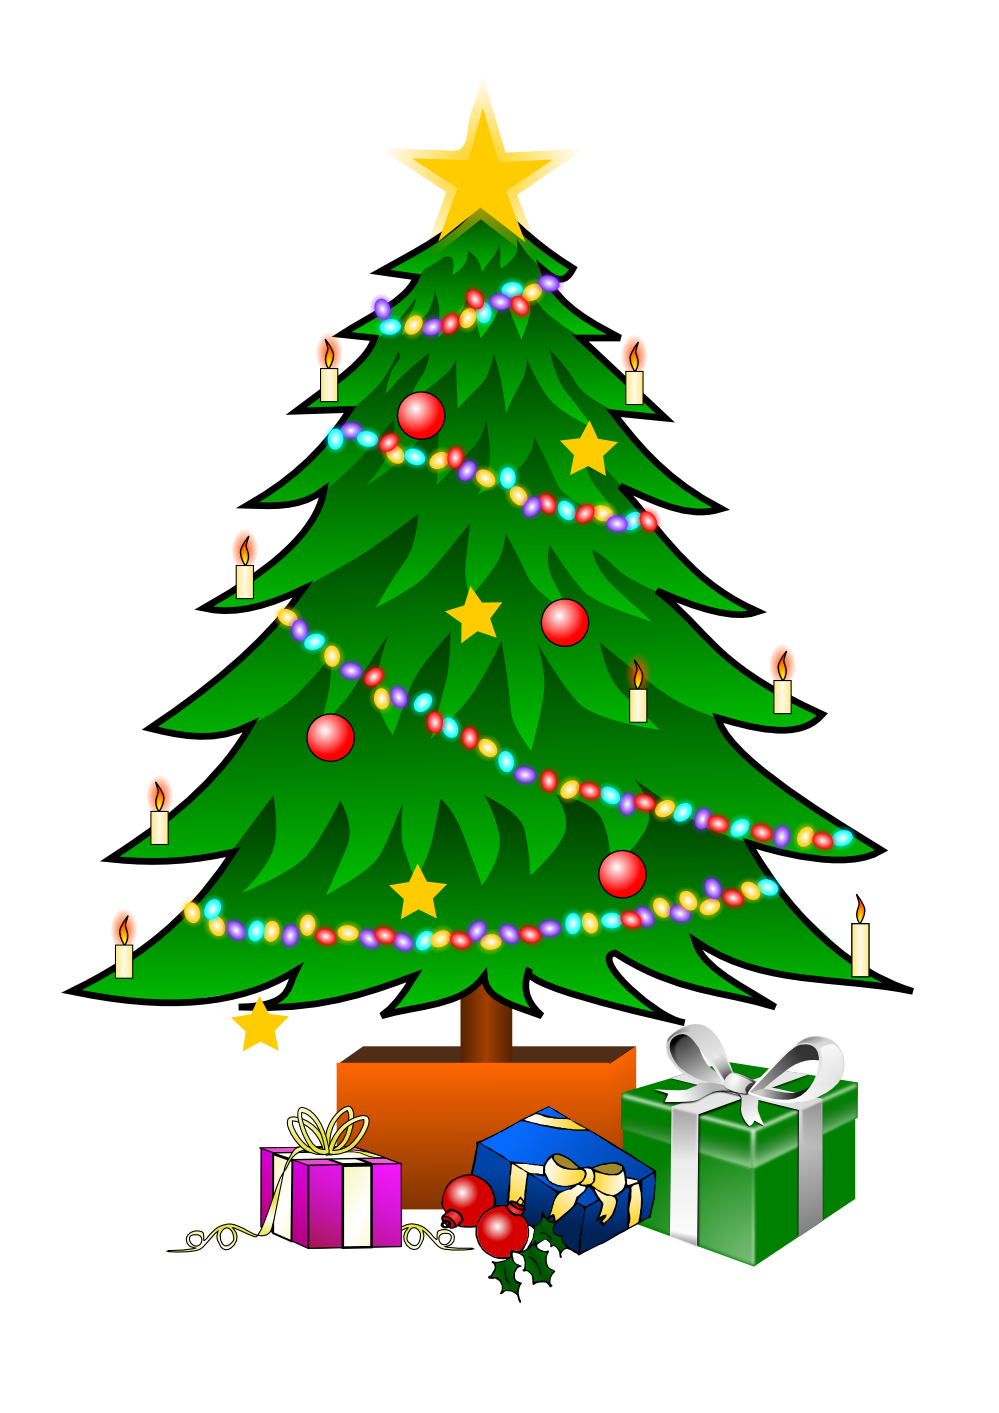 Christmas Tree Clip Art Watermark Clipart Image. Christmas tree clipart, Christmas tree image, Christmas tree picture